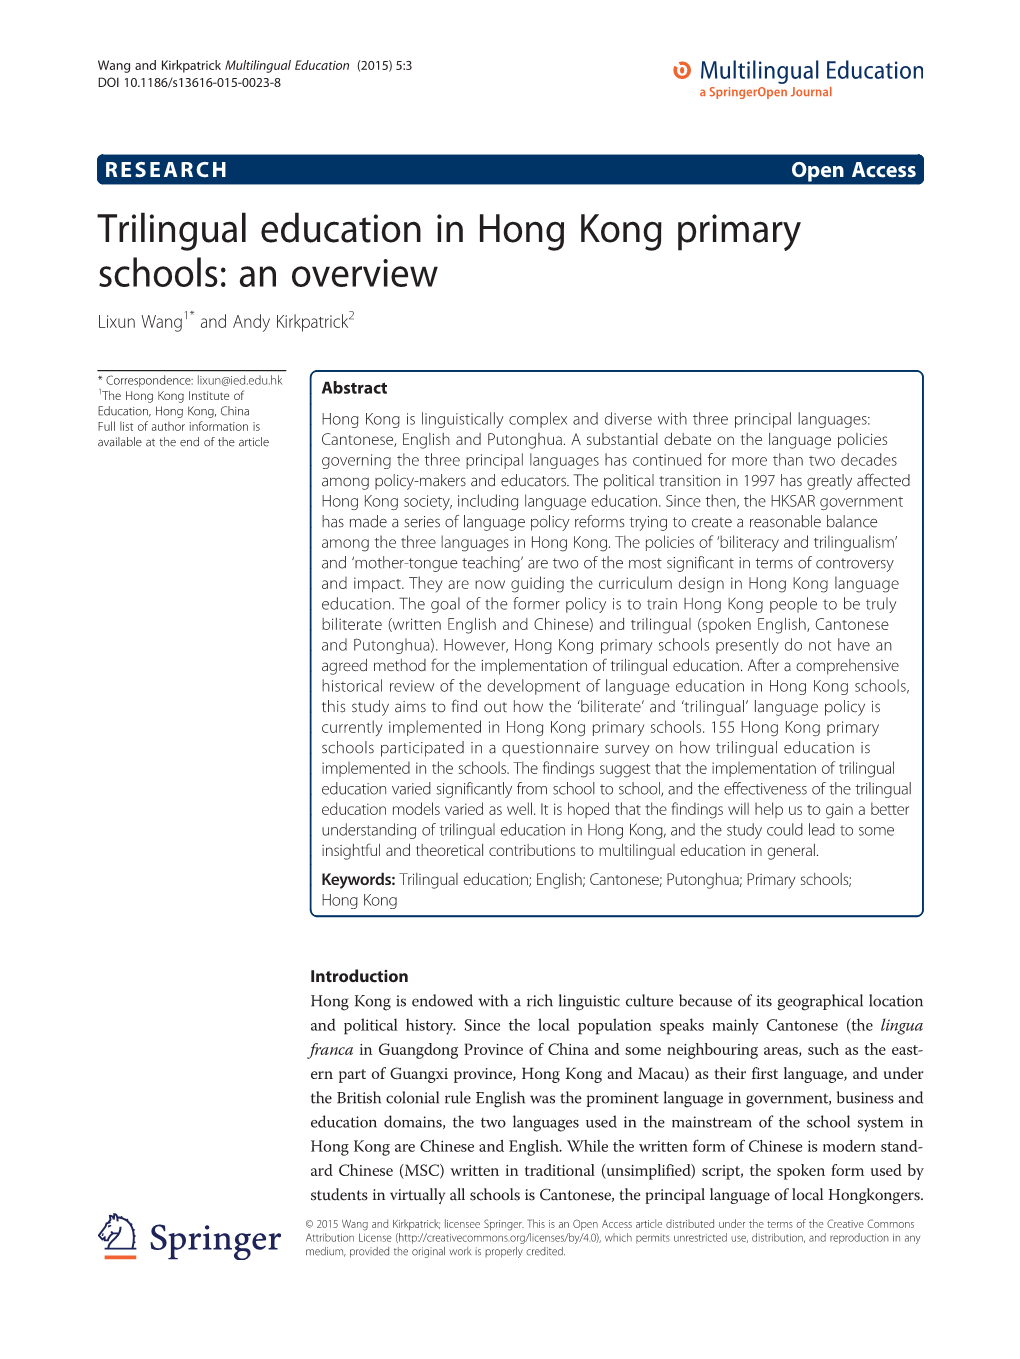 Trilingual Education in Hong Kong Primary Schools: an Overview Lixun Wang1* and Andy Kirkpatrick2